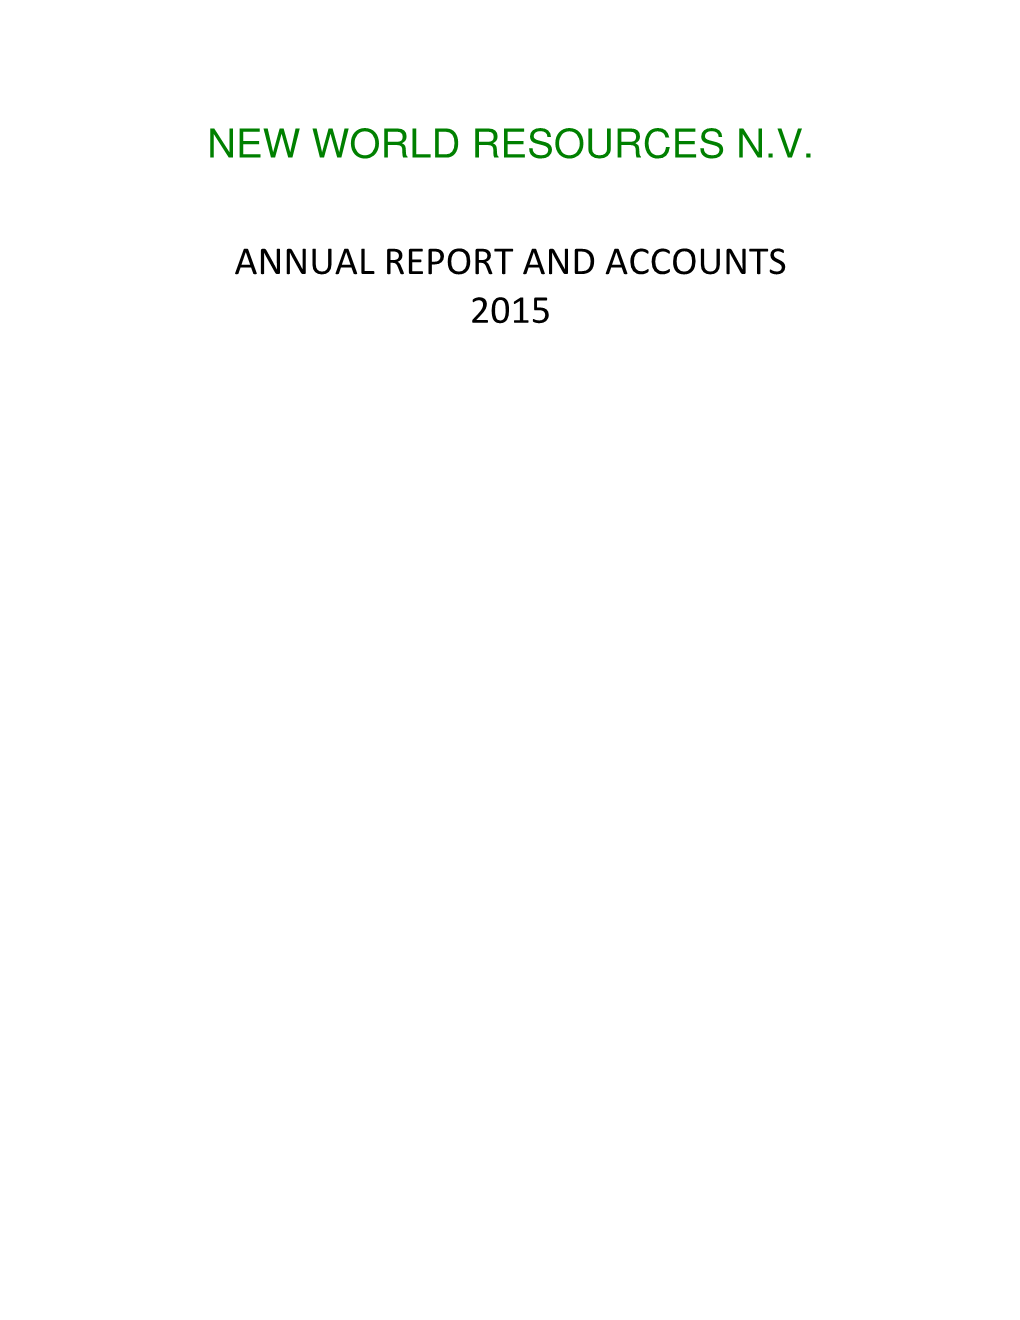 New World Resources N.V. Annual Report And